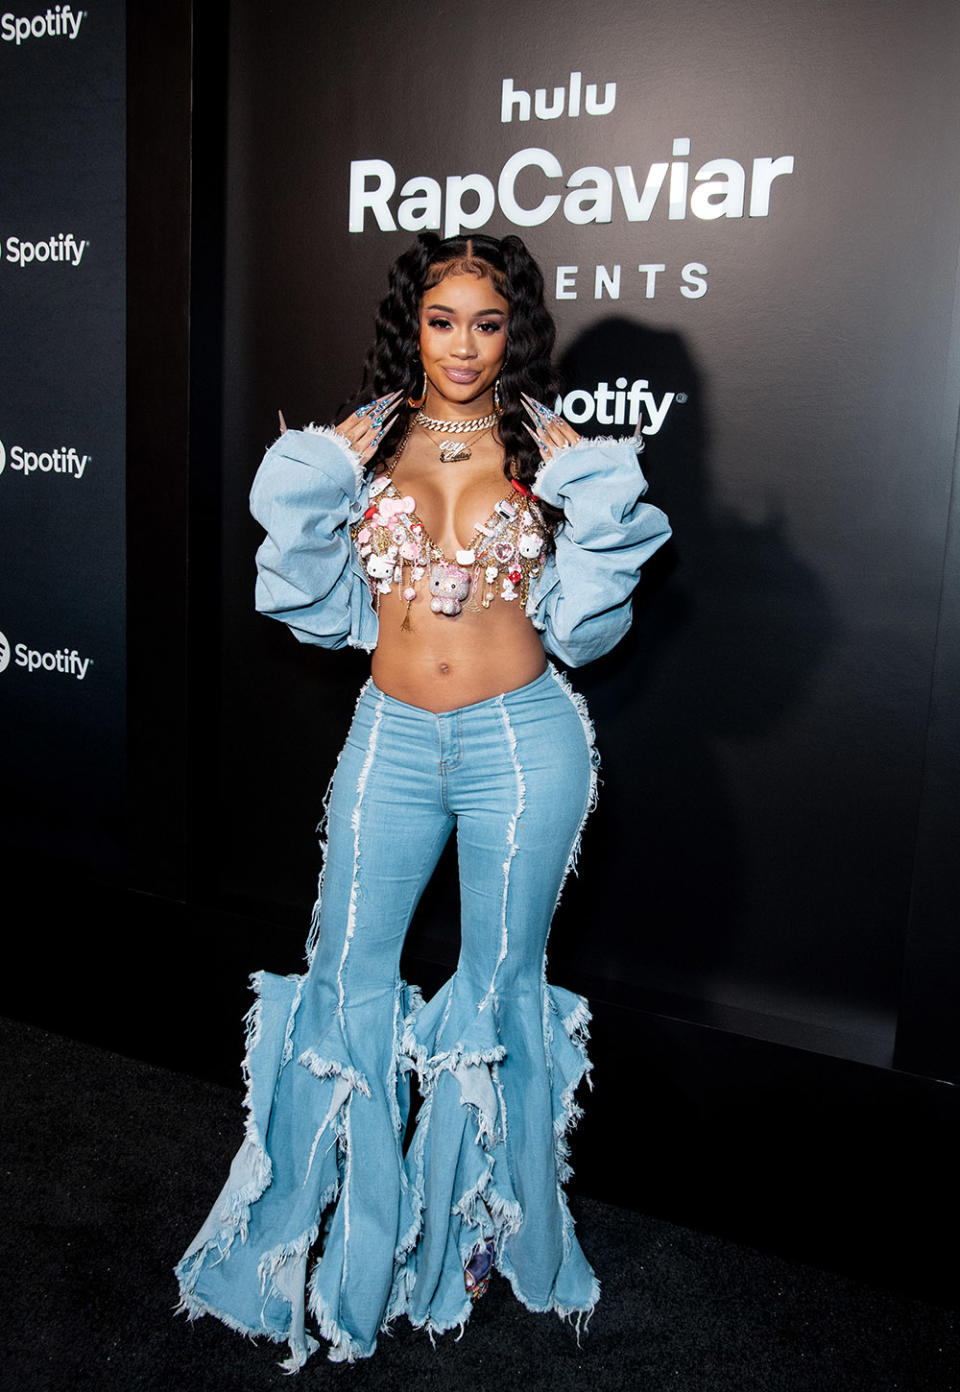 Saweetie attends a red carpet event for Hulu’s “RapCaviar Presents” at Ysabel on March 23, 2023 in West Hollywood, California.